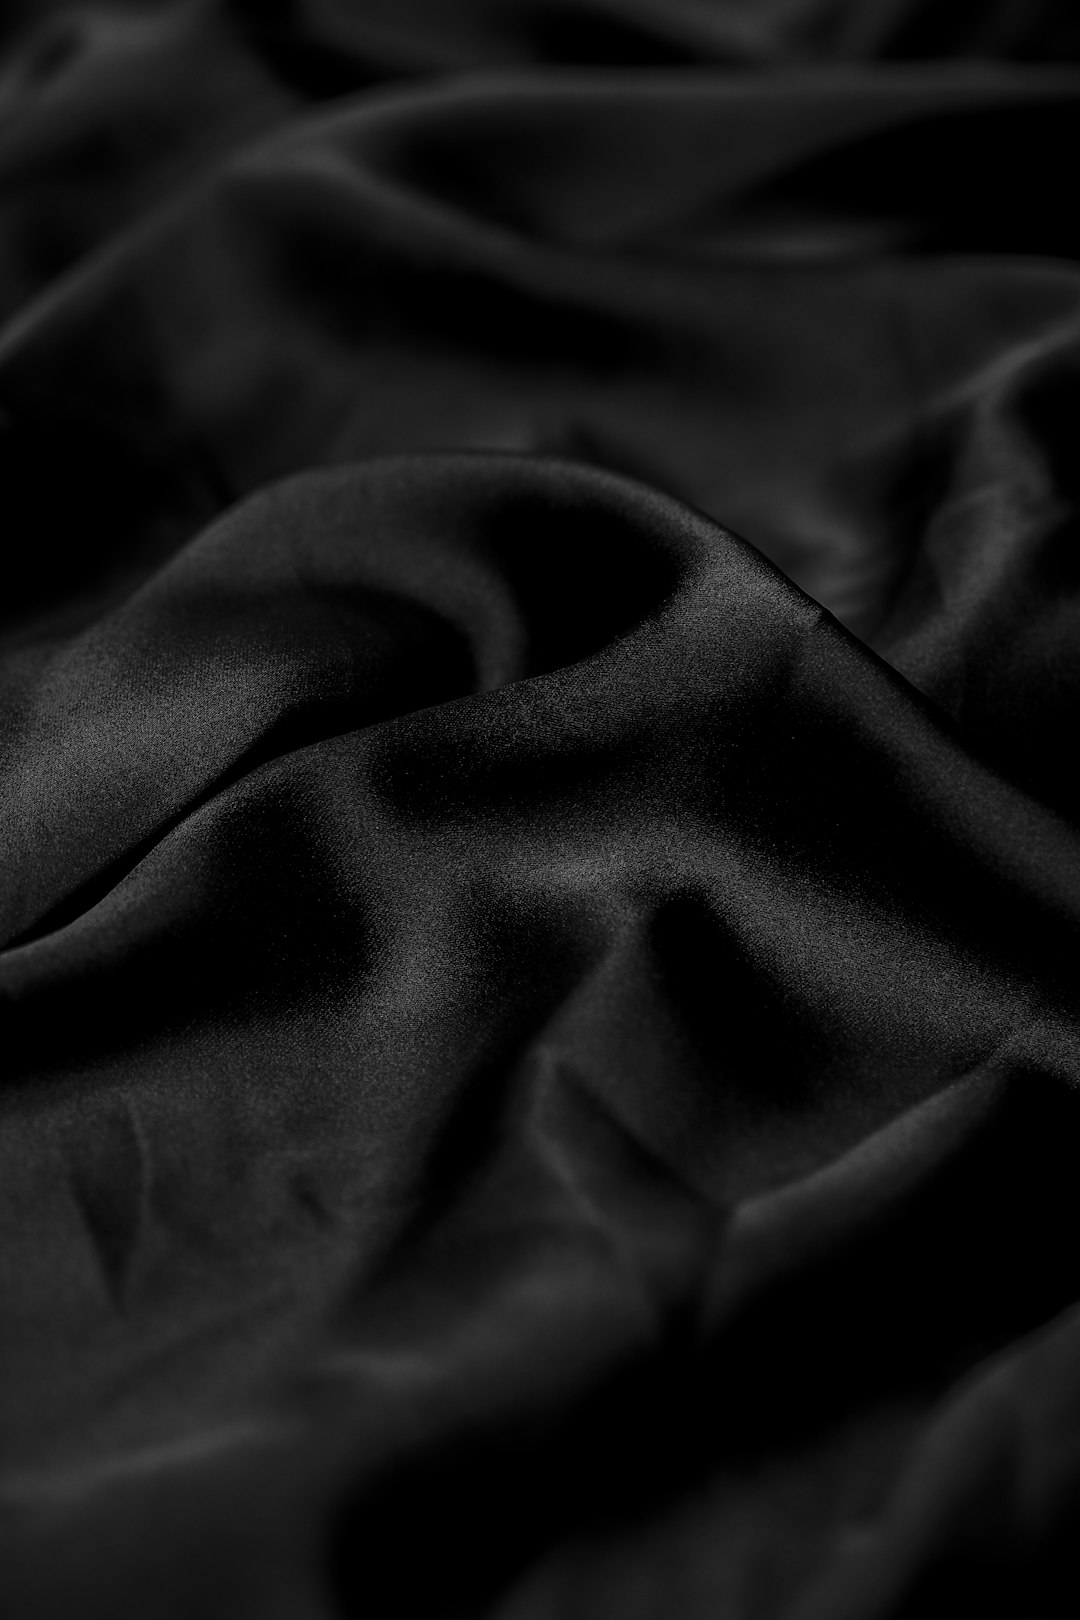 close up photo of gray textile